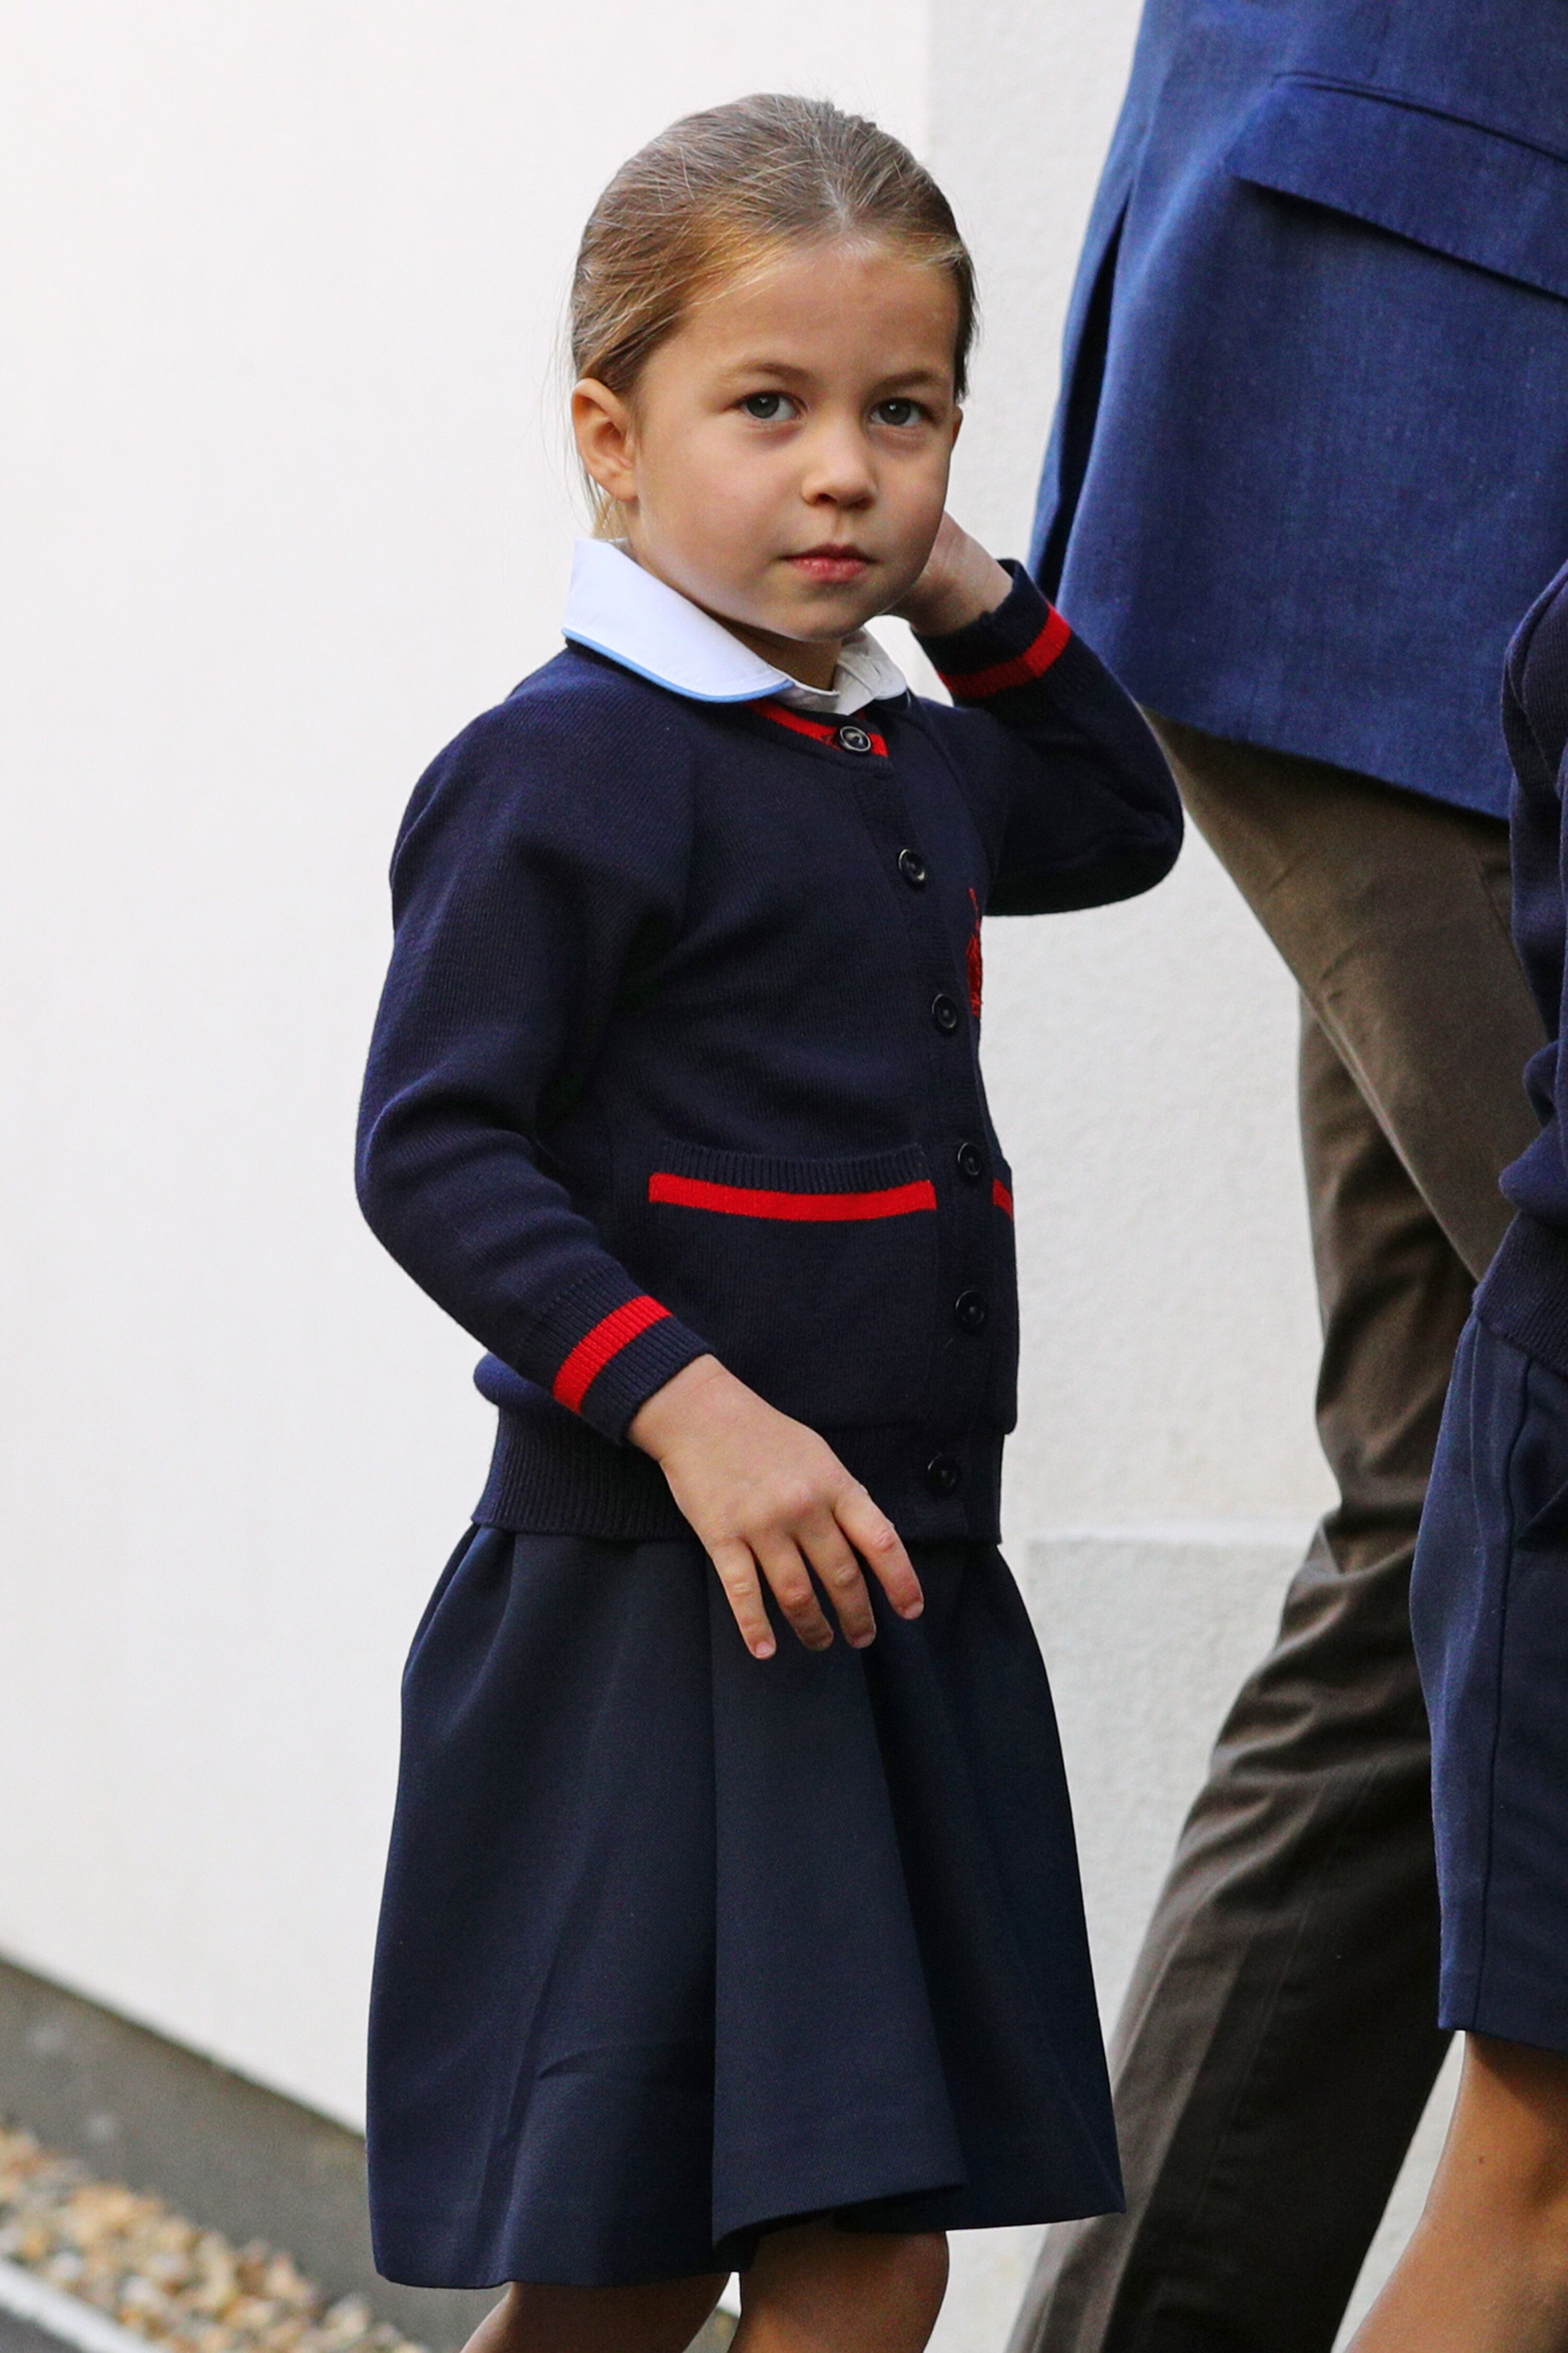 rincess Charlotte arrives for her first day of school at Thomas's Battersea in London on September 5, 2019 in London, England. | Photo: Getty Images